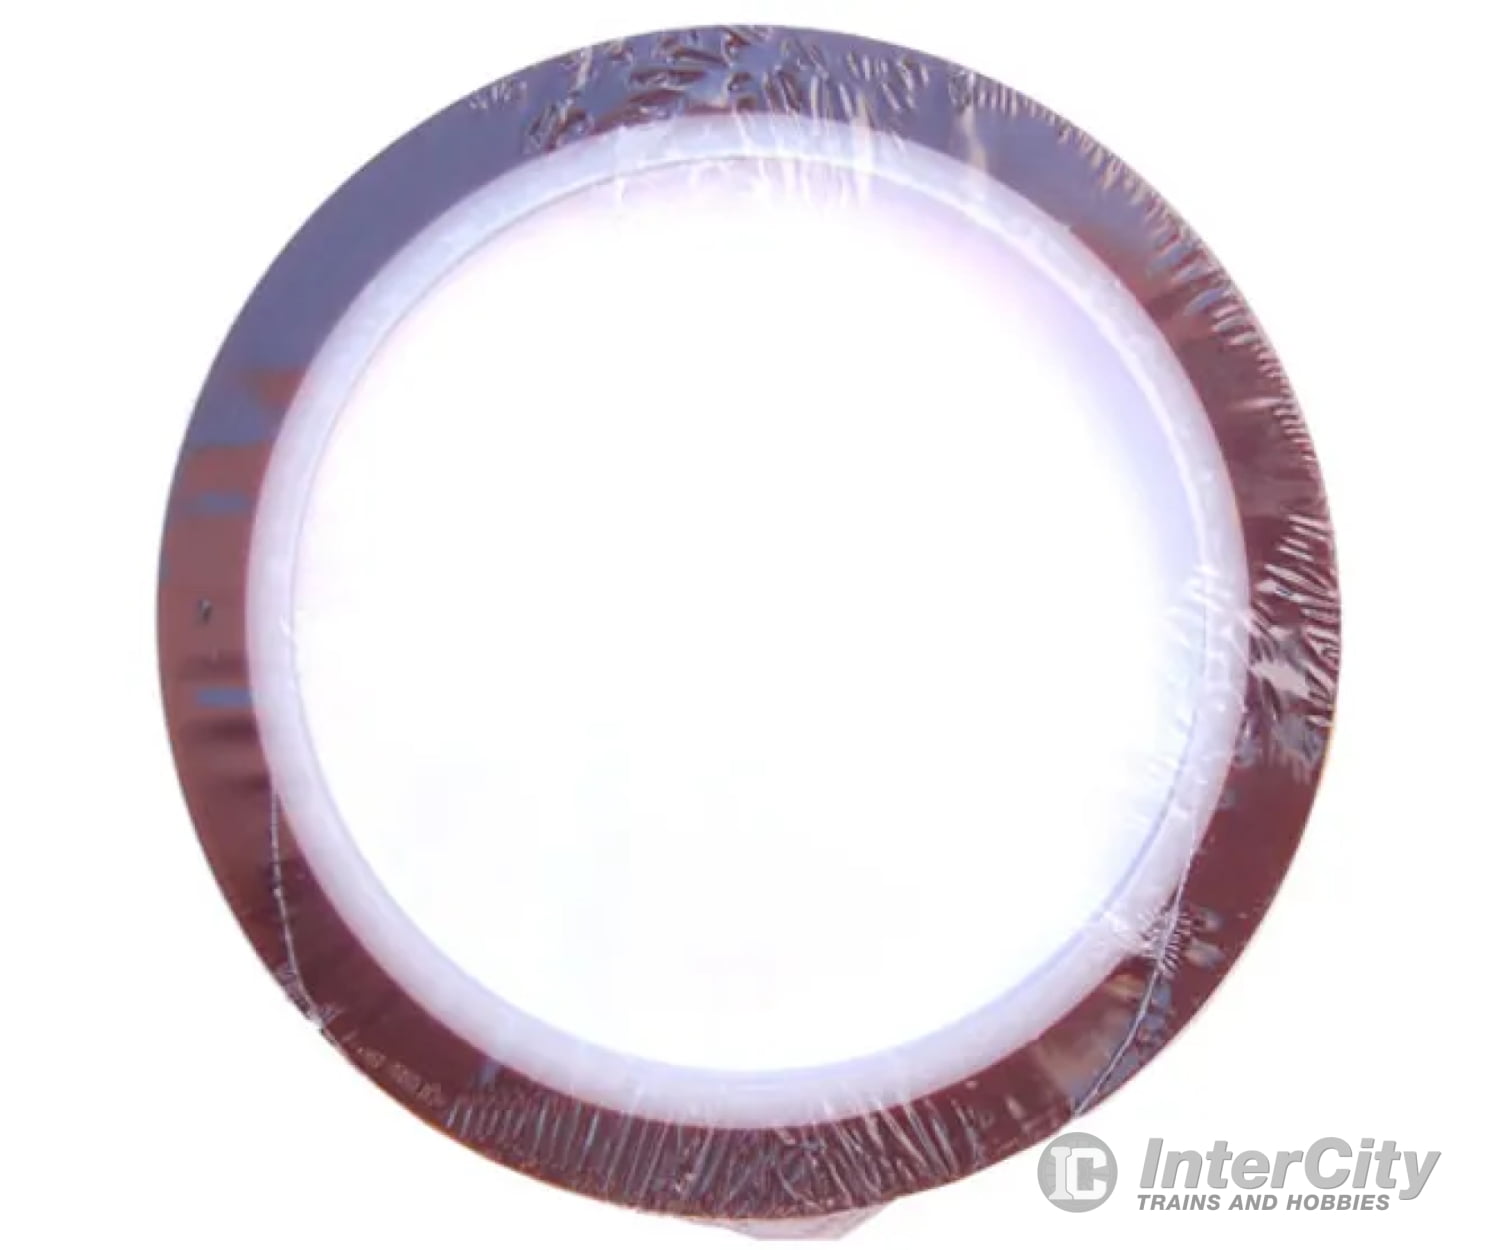 Train Control Systems 1304 Kapton Tape - Roll Length: 36 Yards 32.9M - - Width: 1/2’ 1.3Cm Dcc